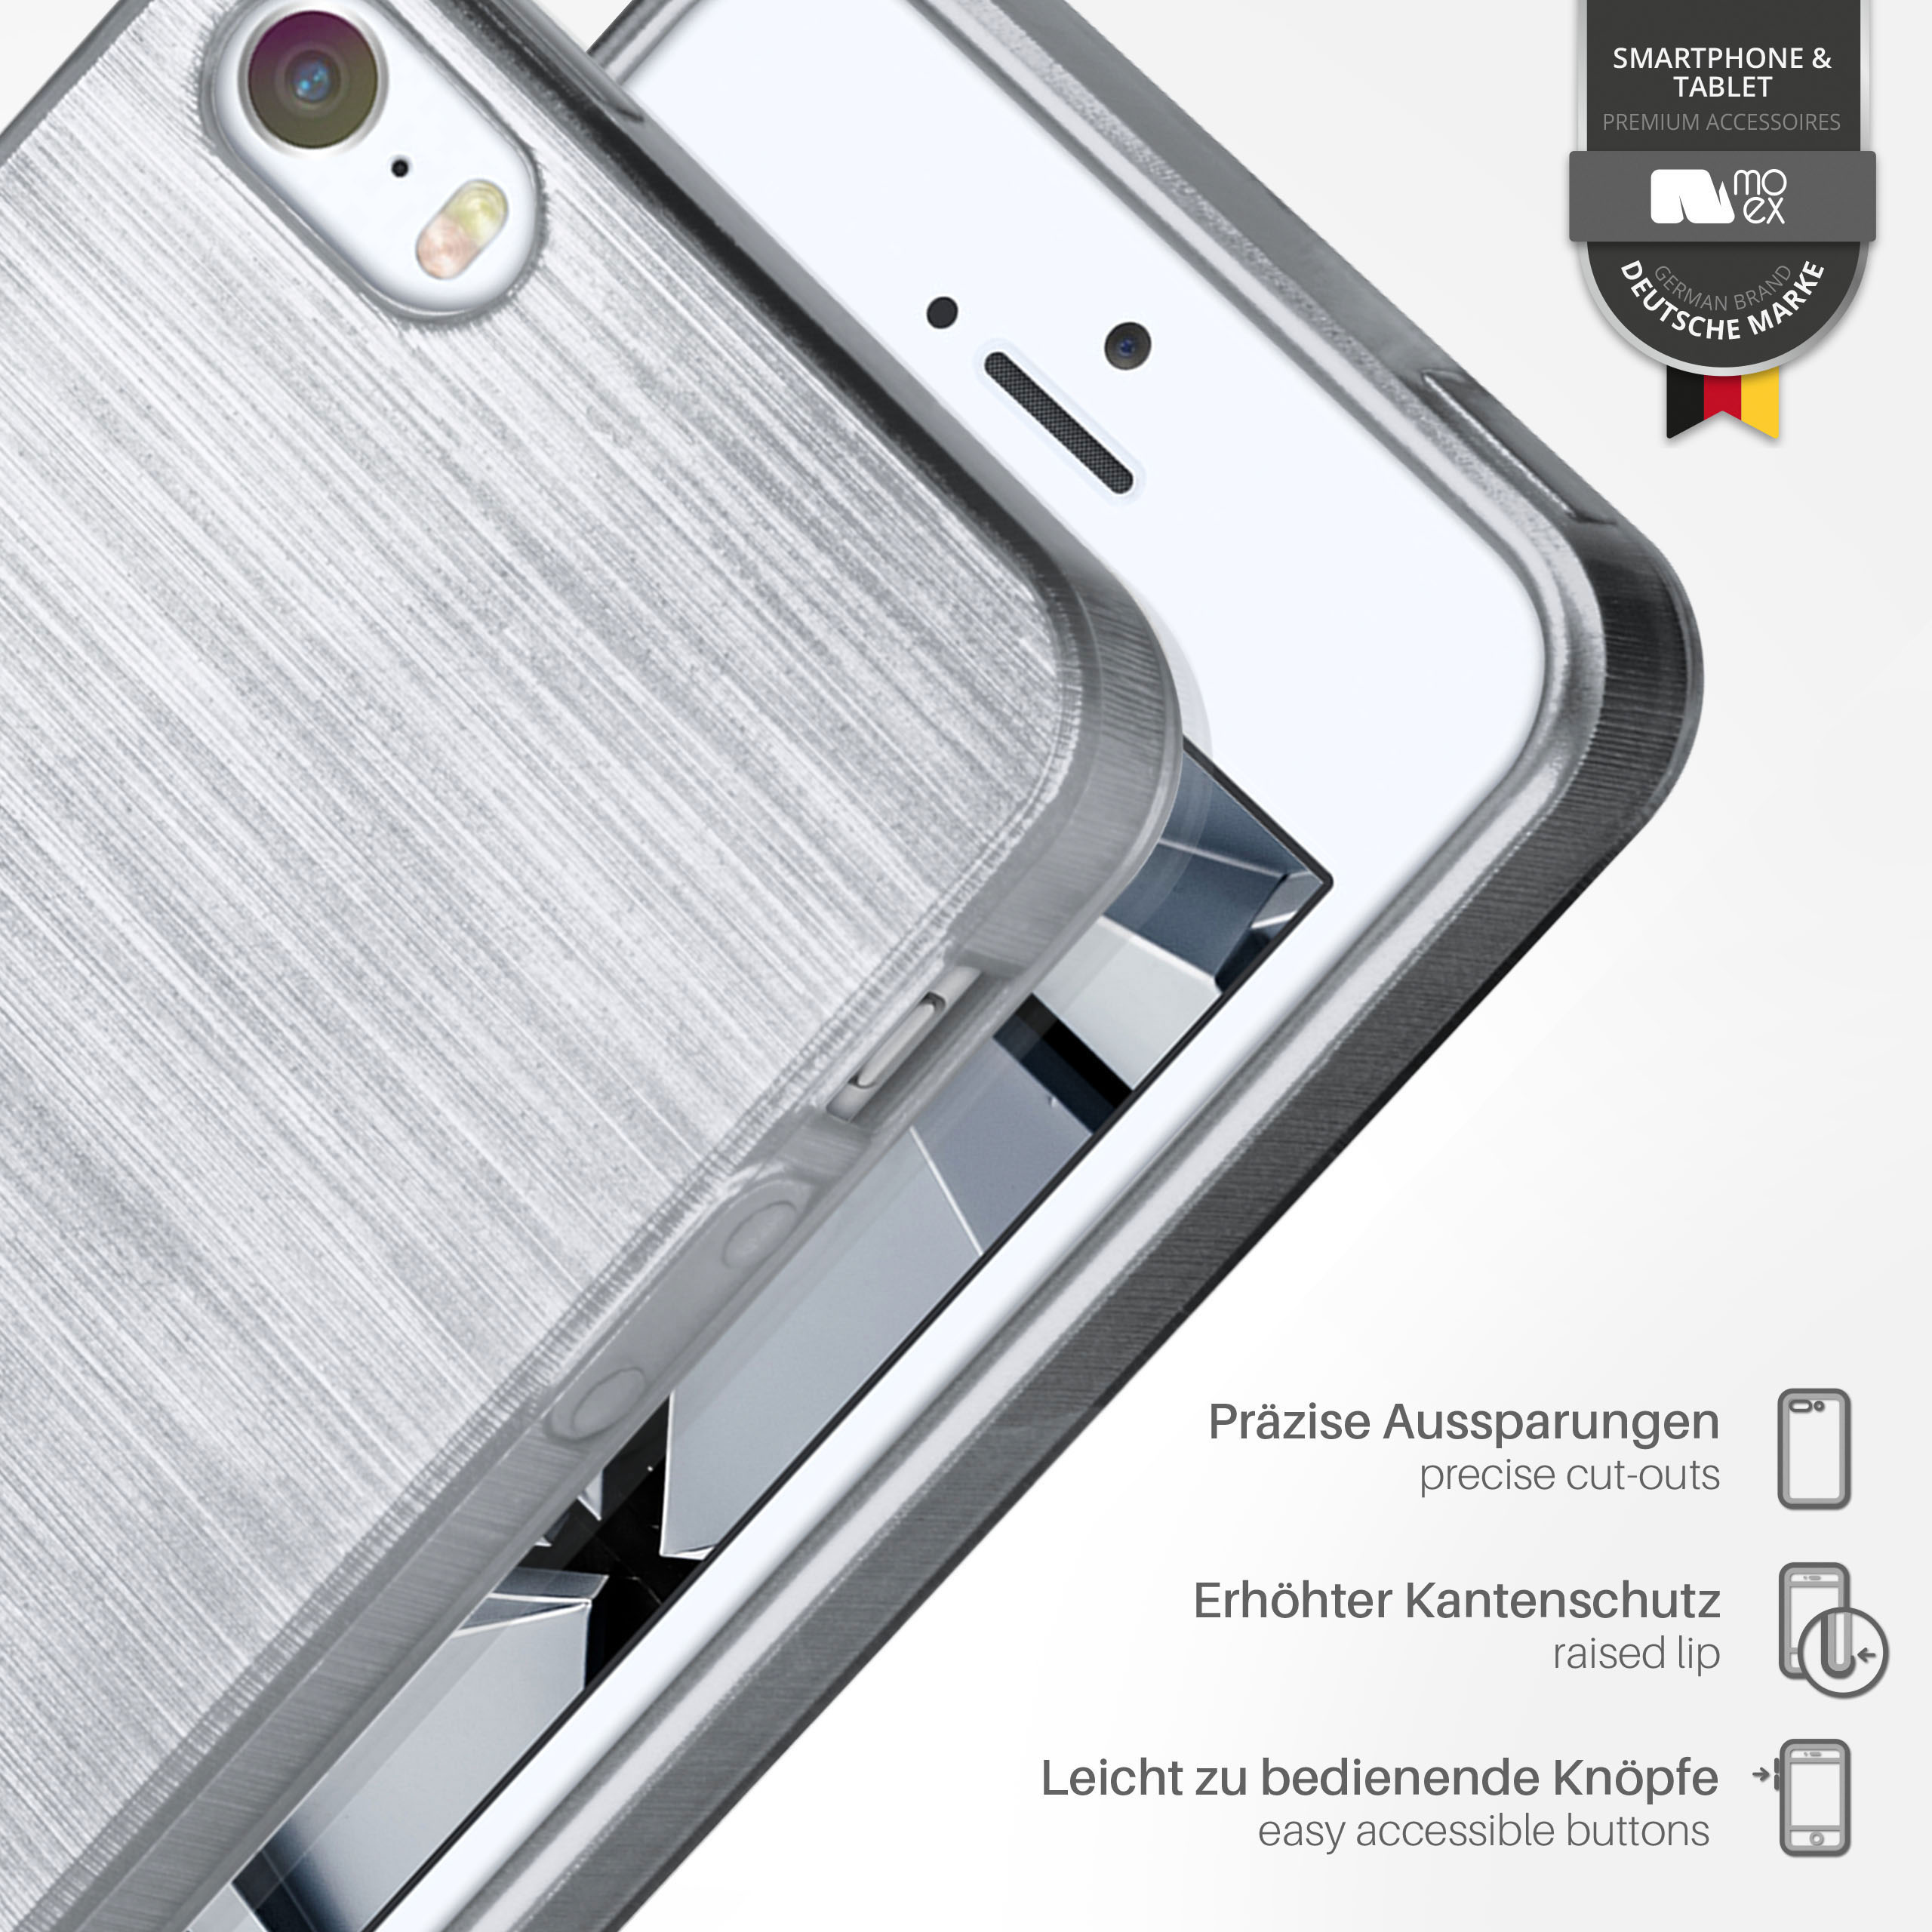 Case, 5 (2016), / MOEX iPhone 5s Platin-Silver Backcover, Brushed / Apple, SE